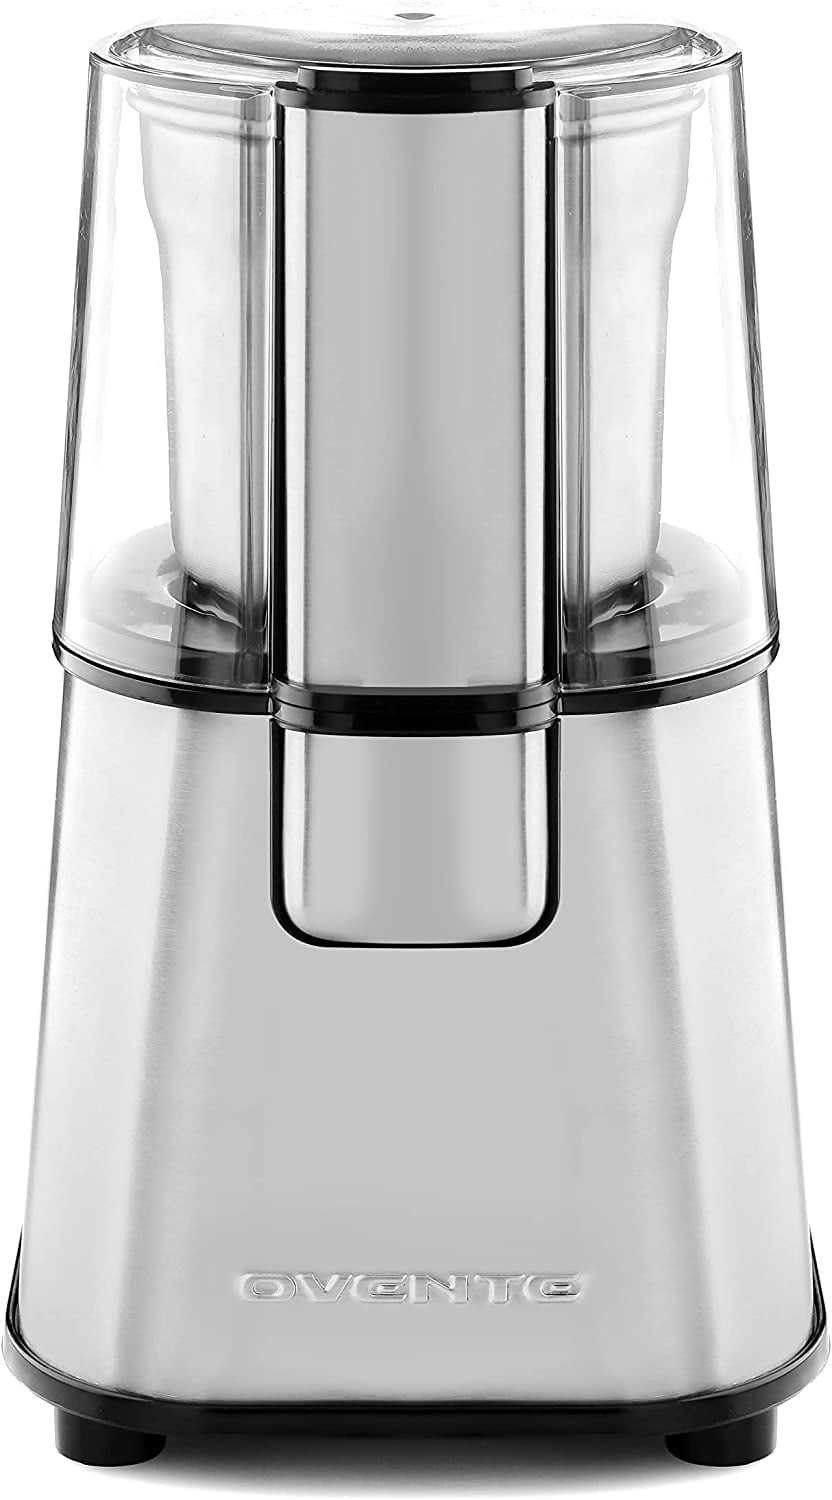 Willz 1.7 oz. Silver Stainless Steel Blade Electric Coffee Grinder in Silver